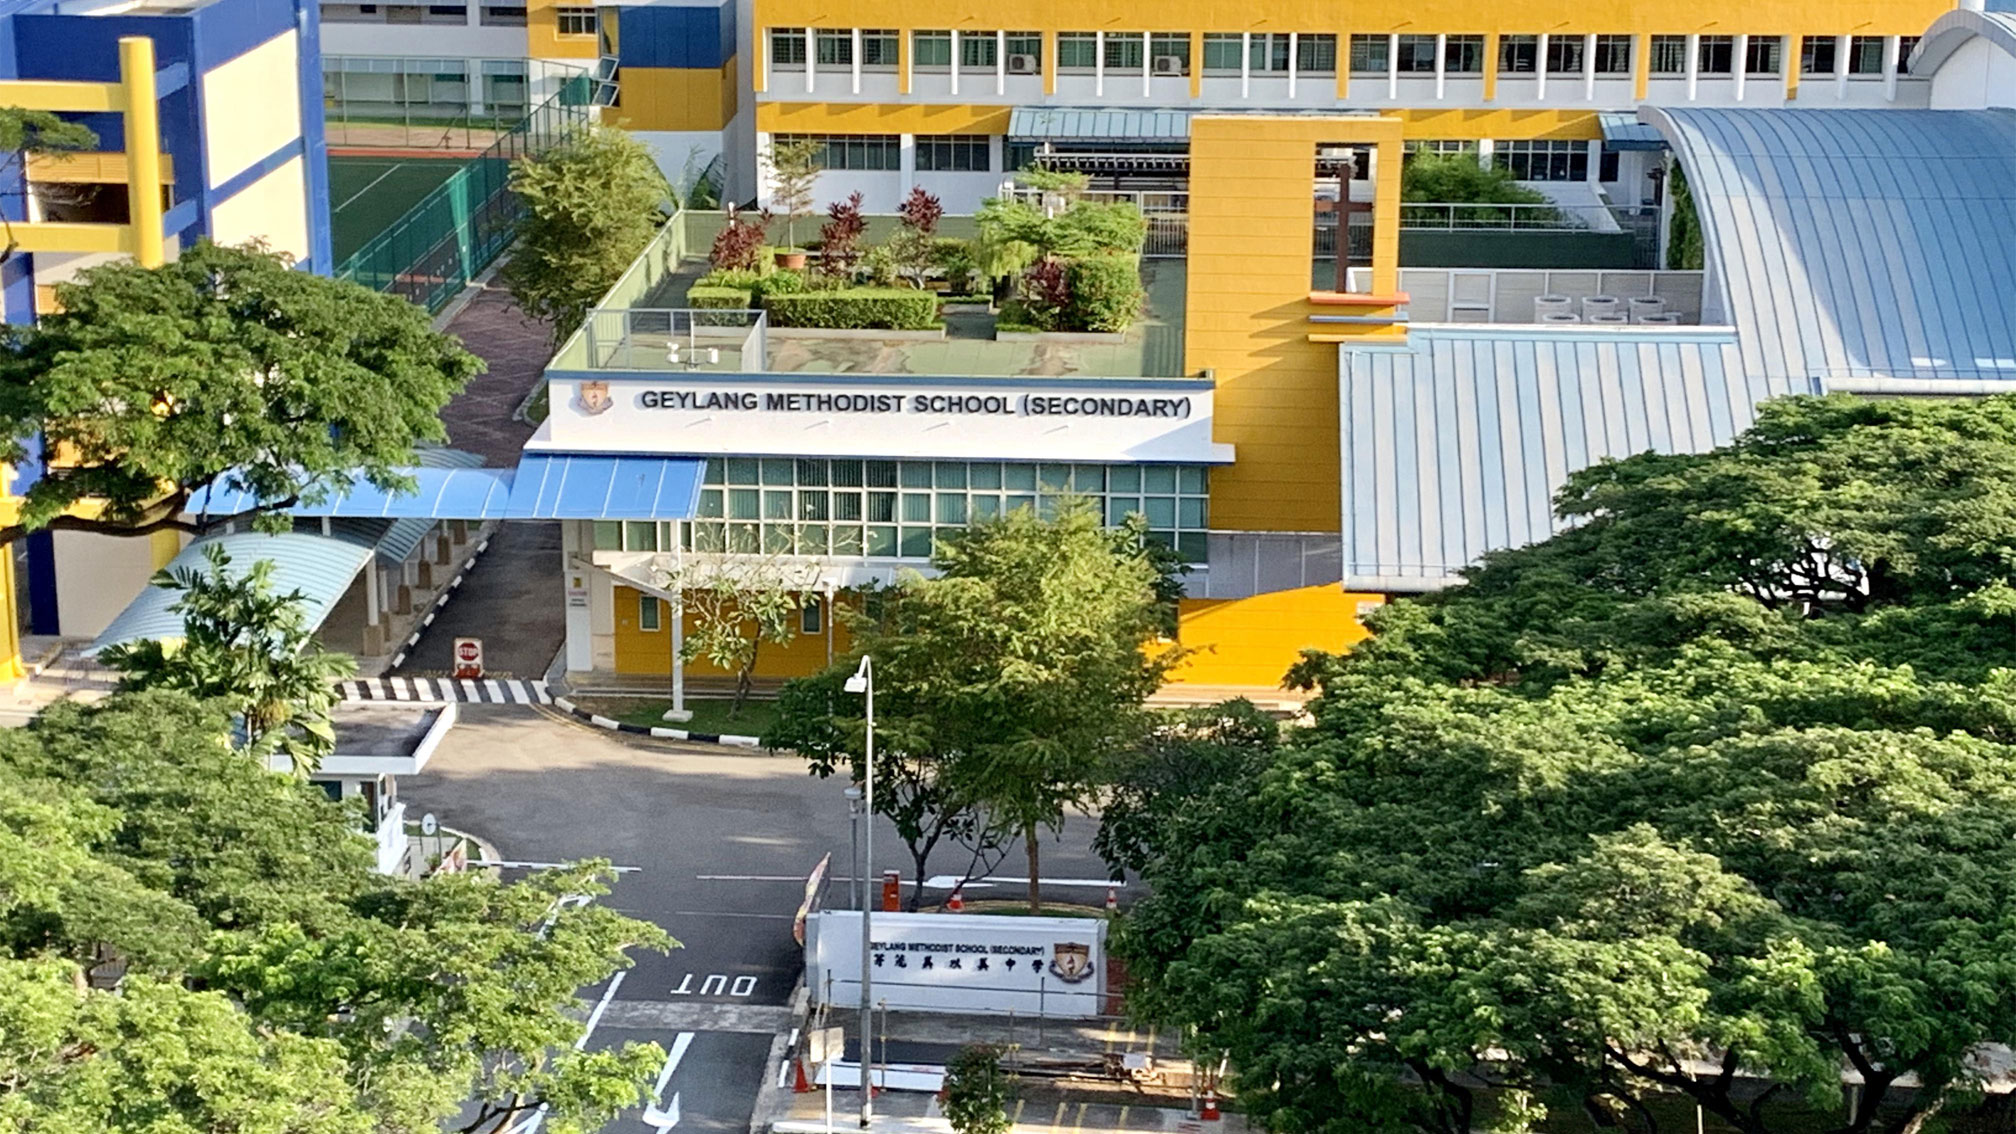 It takes 9 minutes to walk from Gems Ville to Geylang Methodist School (Secondary)